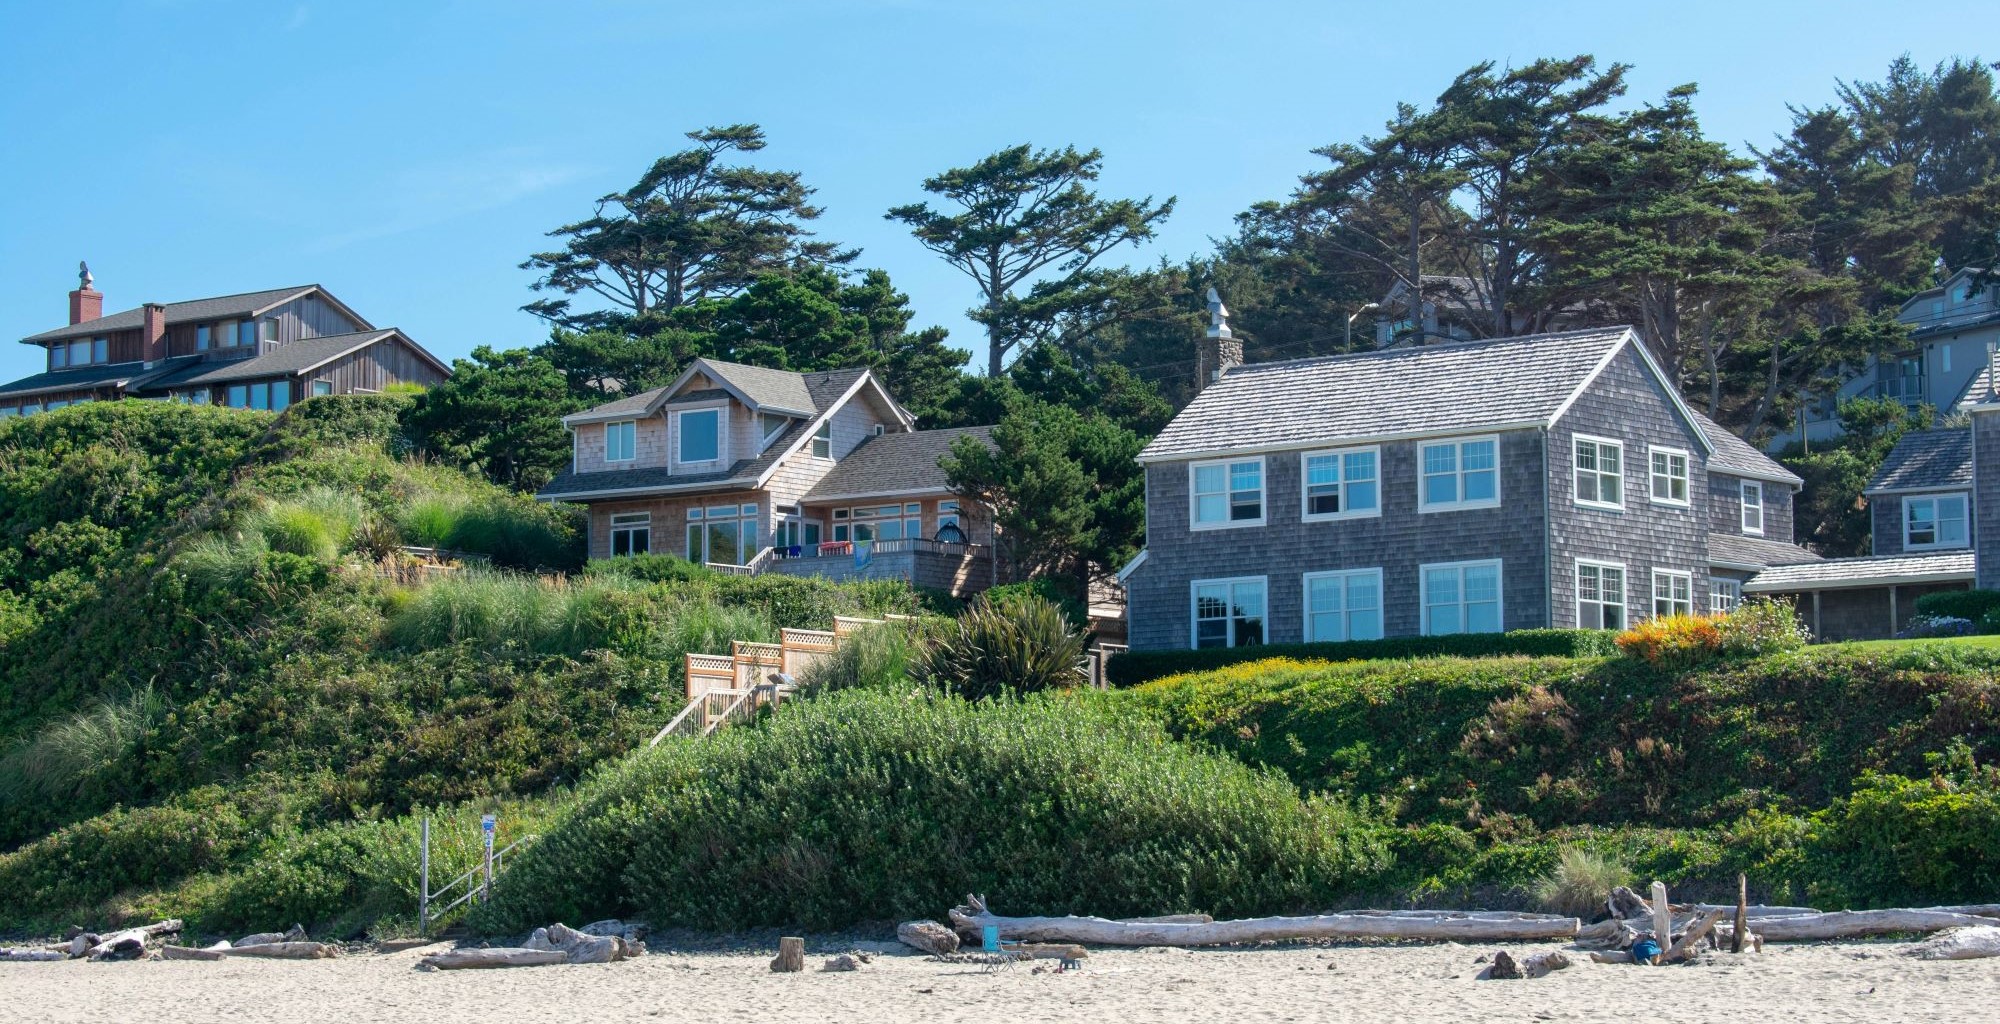 Homes on the beach at Cannon Beach, OR. Photo: Knopka Ivy